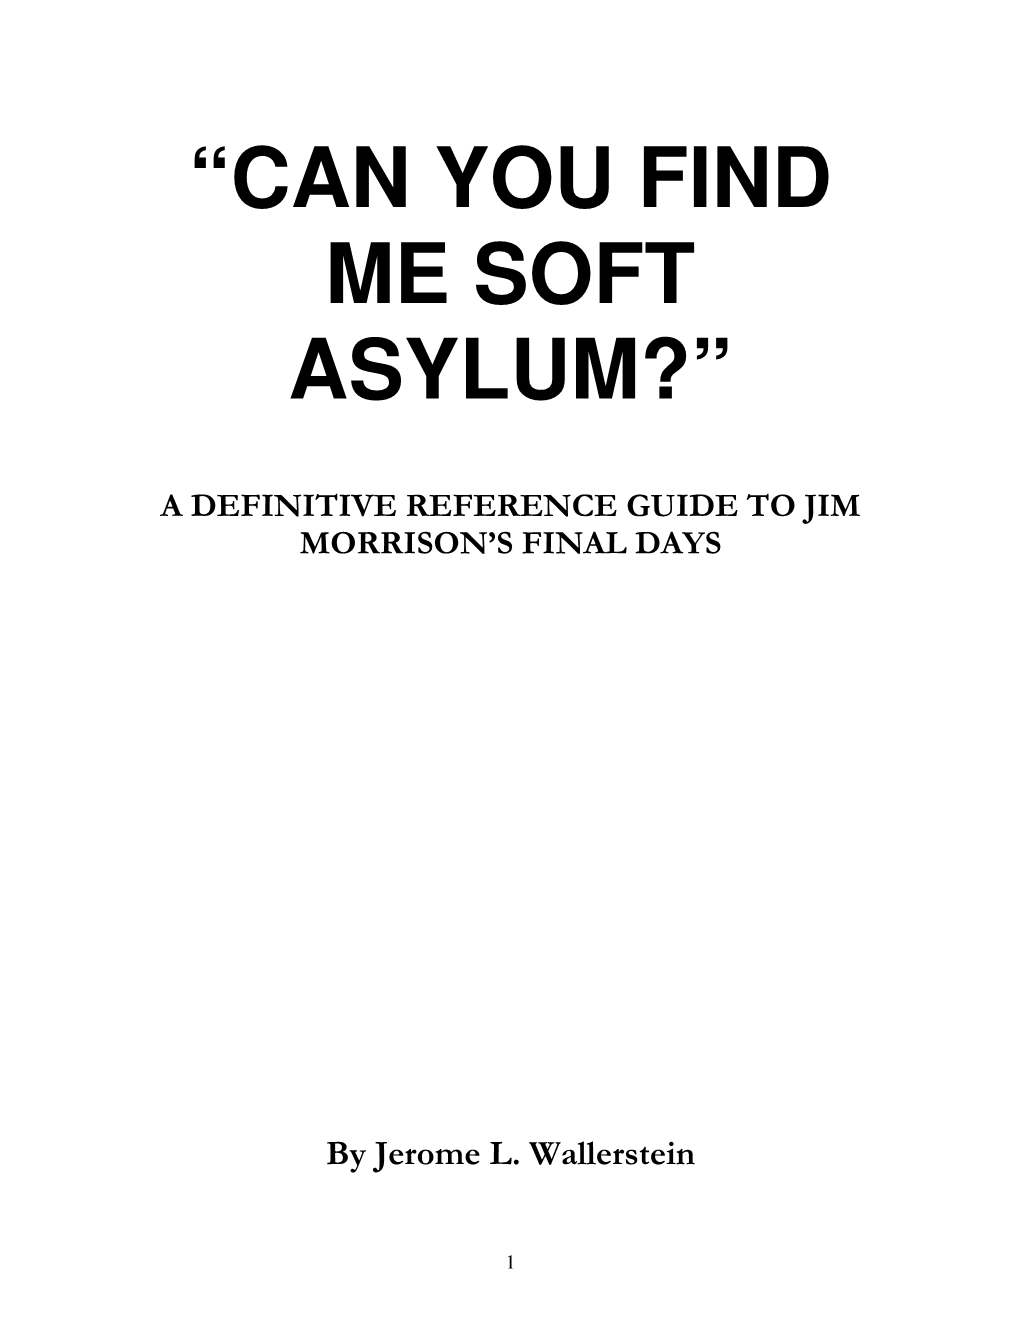 “Can You Find Me Soft Asylum?”